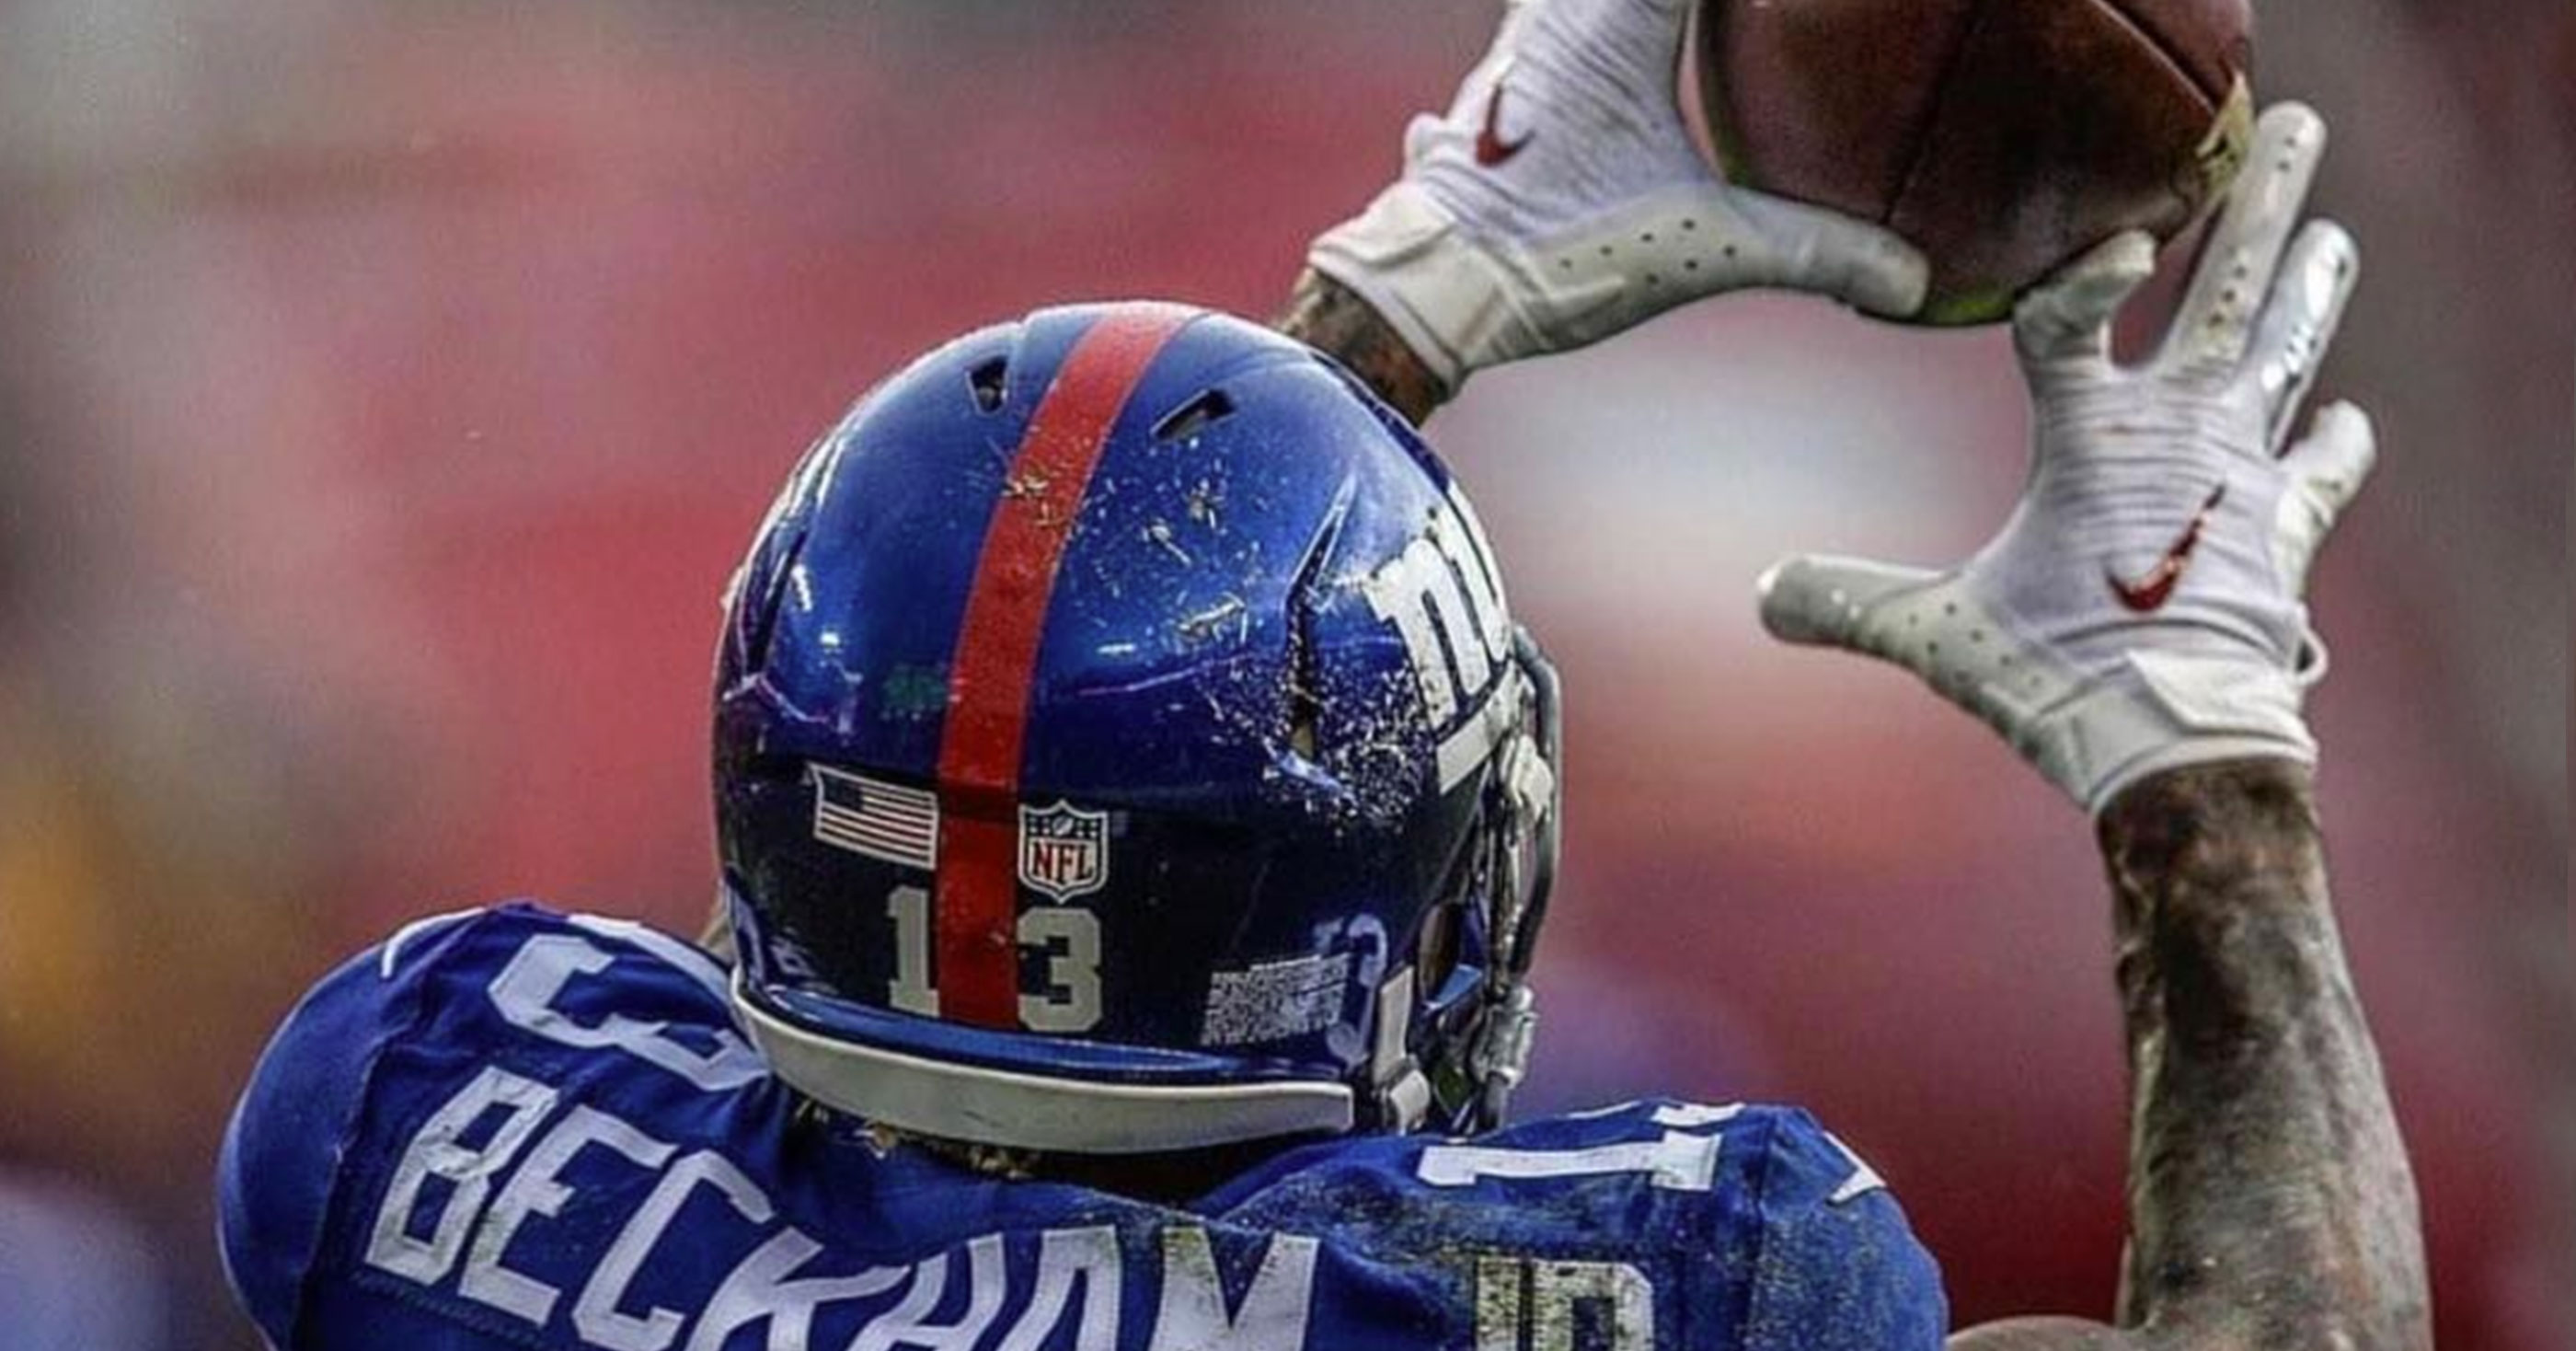 Incredible Photo Captured The Exact Moment Odell Beckham Jr. Dislocated His Finger2800 x 1468